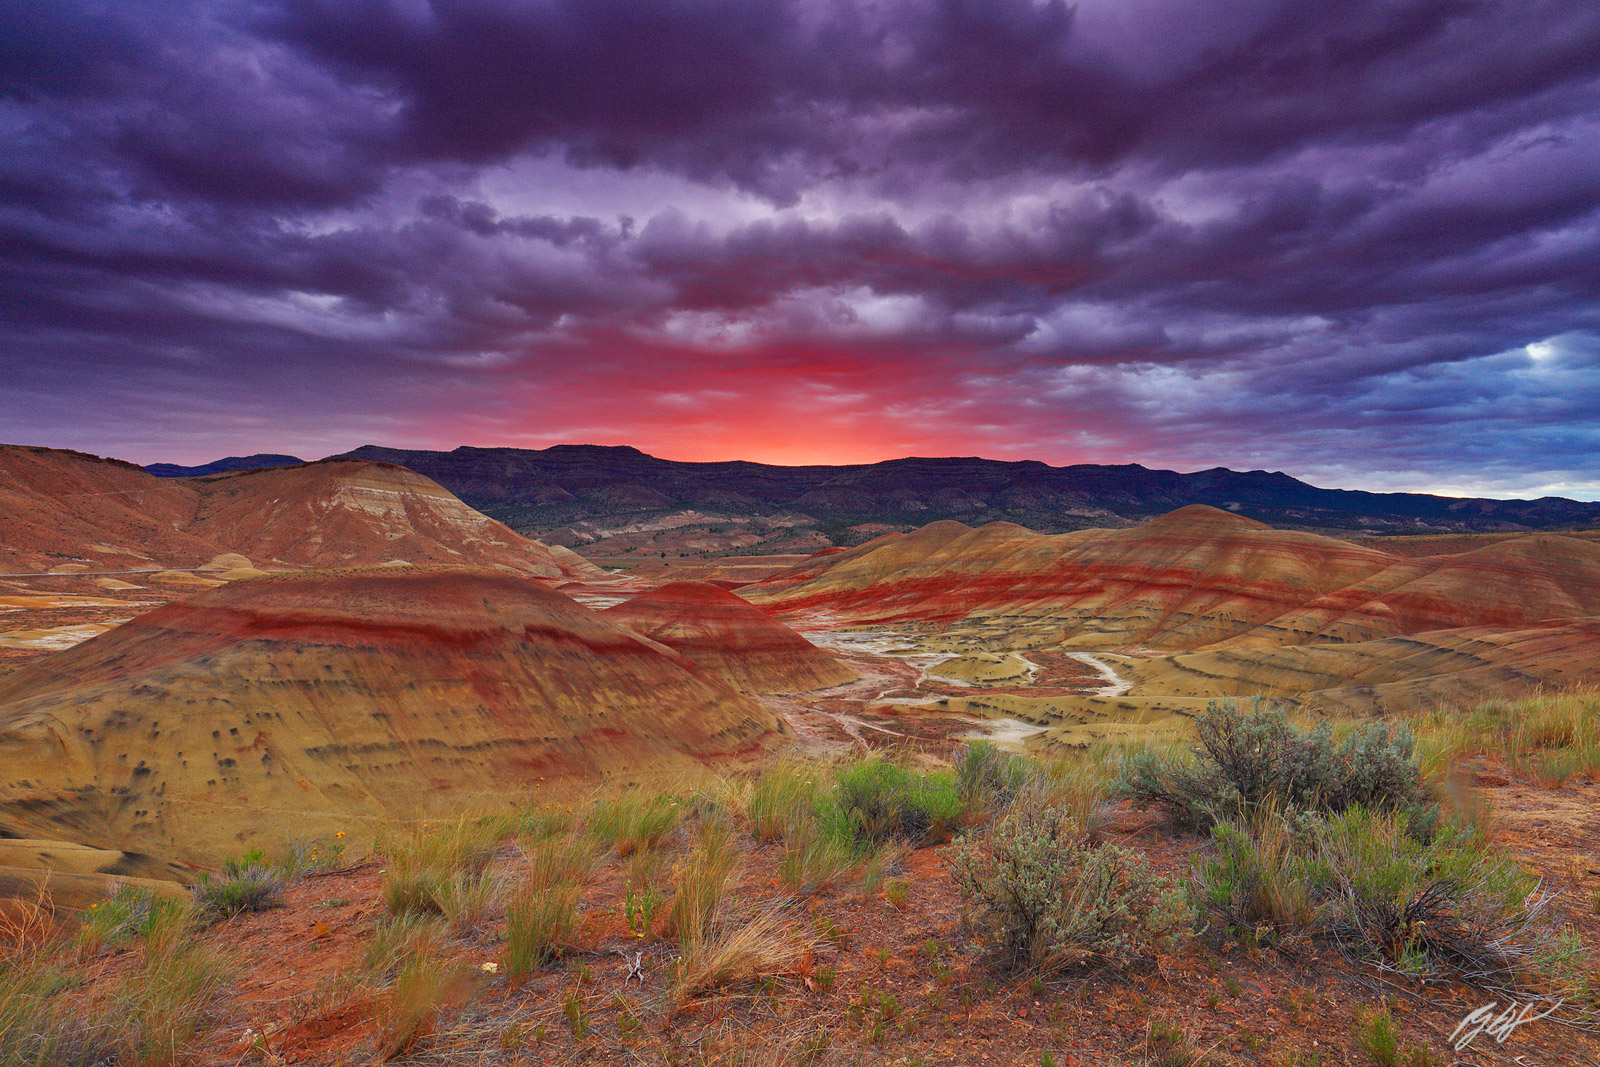 Sunrise over the Painted Hills in John Day Fossil Beds National Monumnet in Oregon